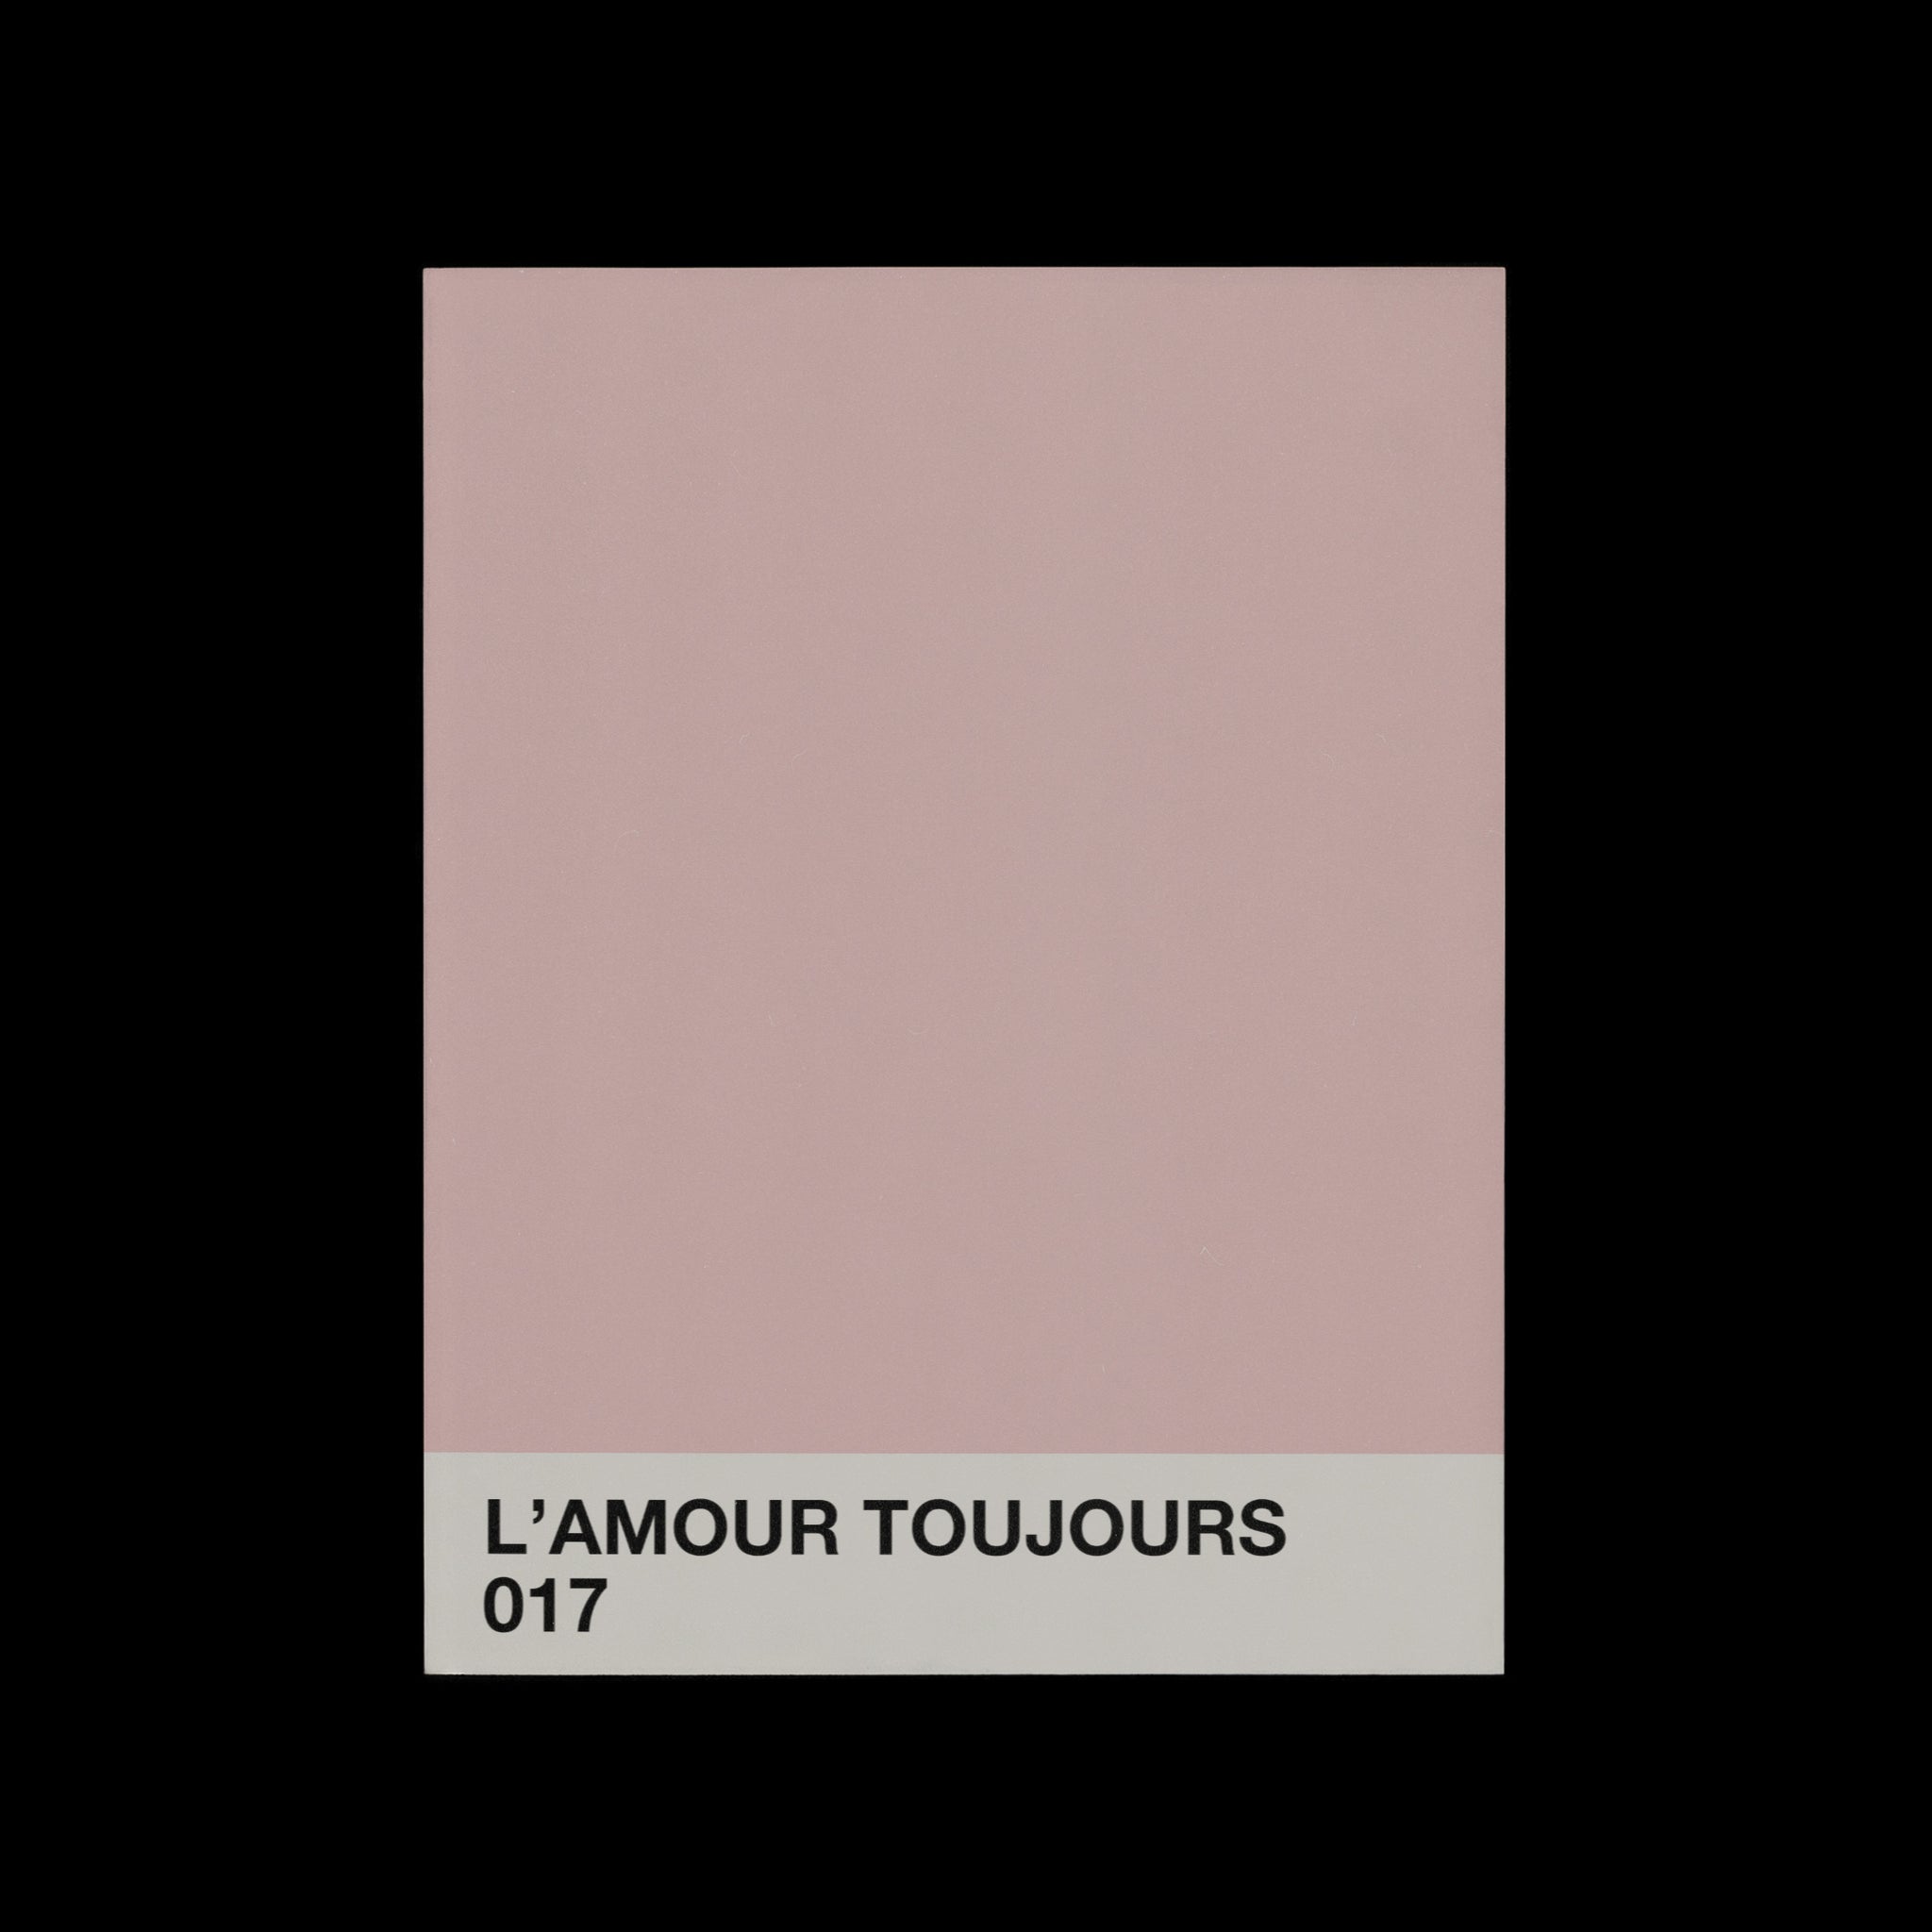 © les muses / Shades is a collection of color shade wall art prints perfect for a modern or minimalist gallery wall. The pastel color block posters have a minimal aesthetic and comes in an array of dreamy colors.